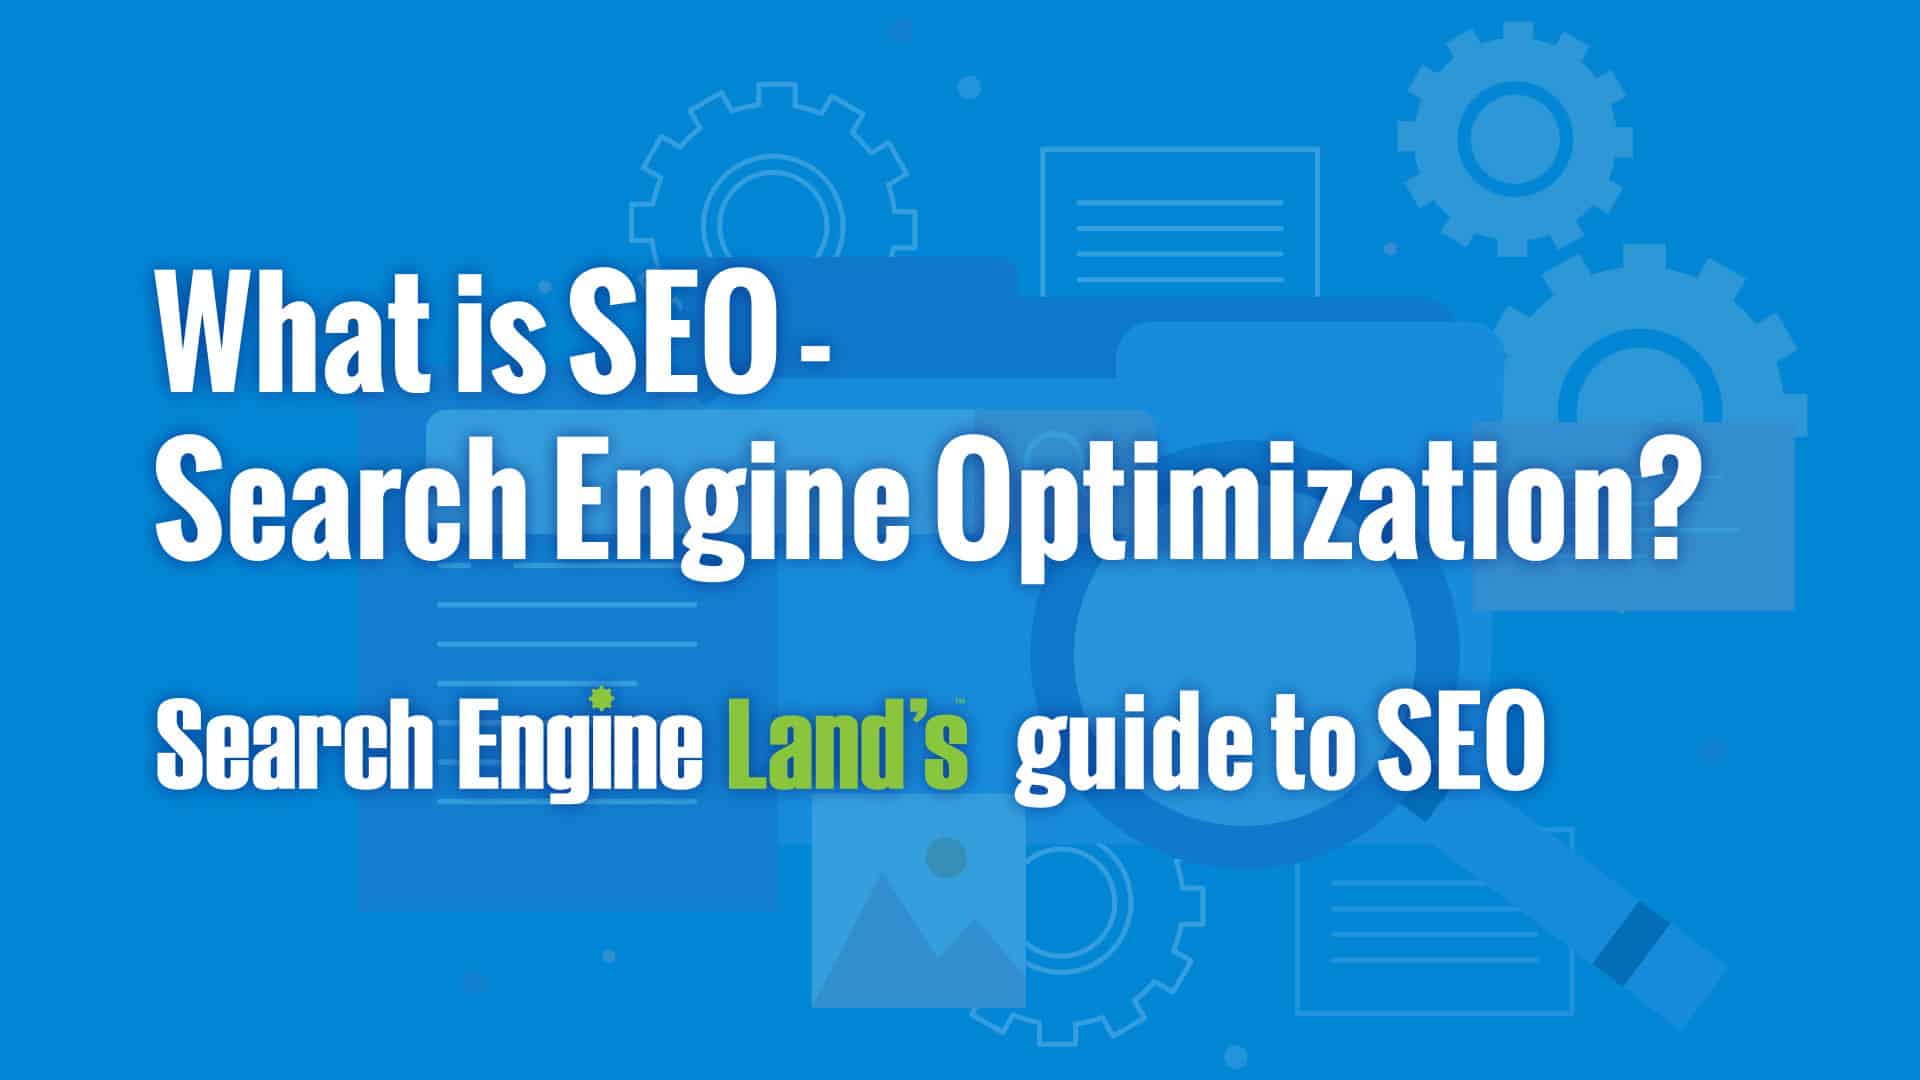 What is SEO and how to use it on your website? Find out here!